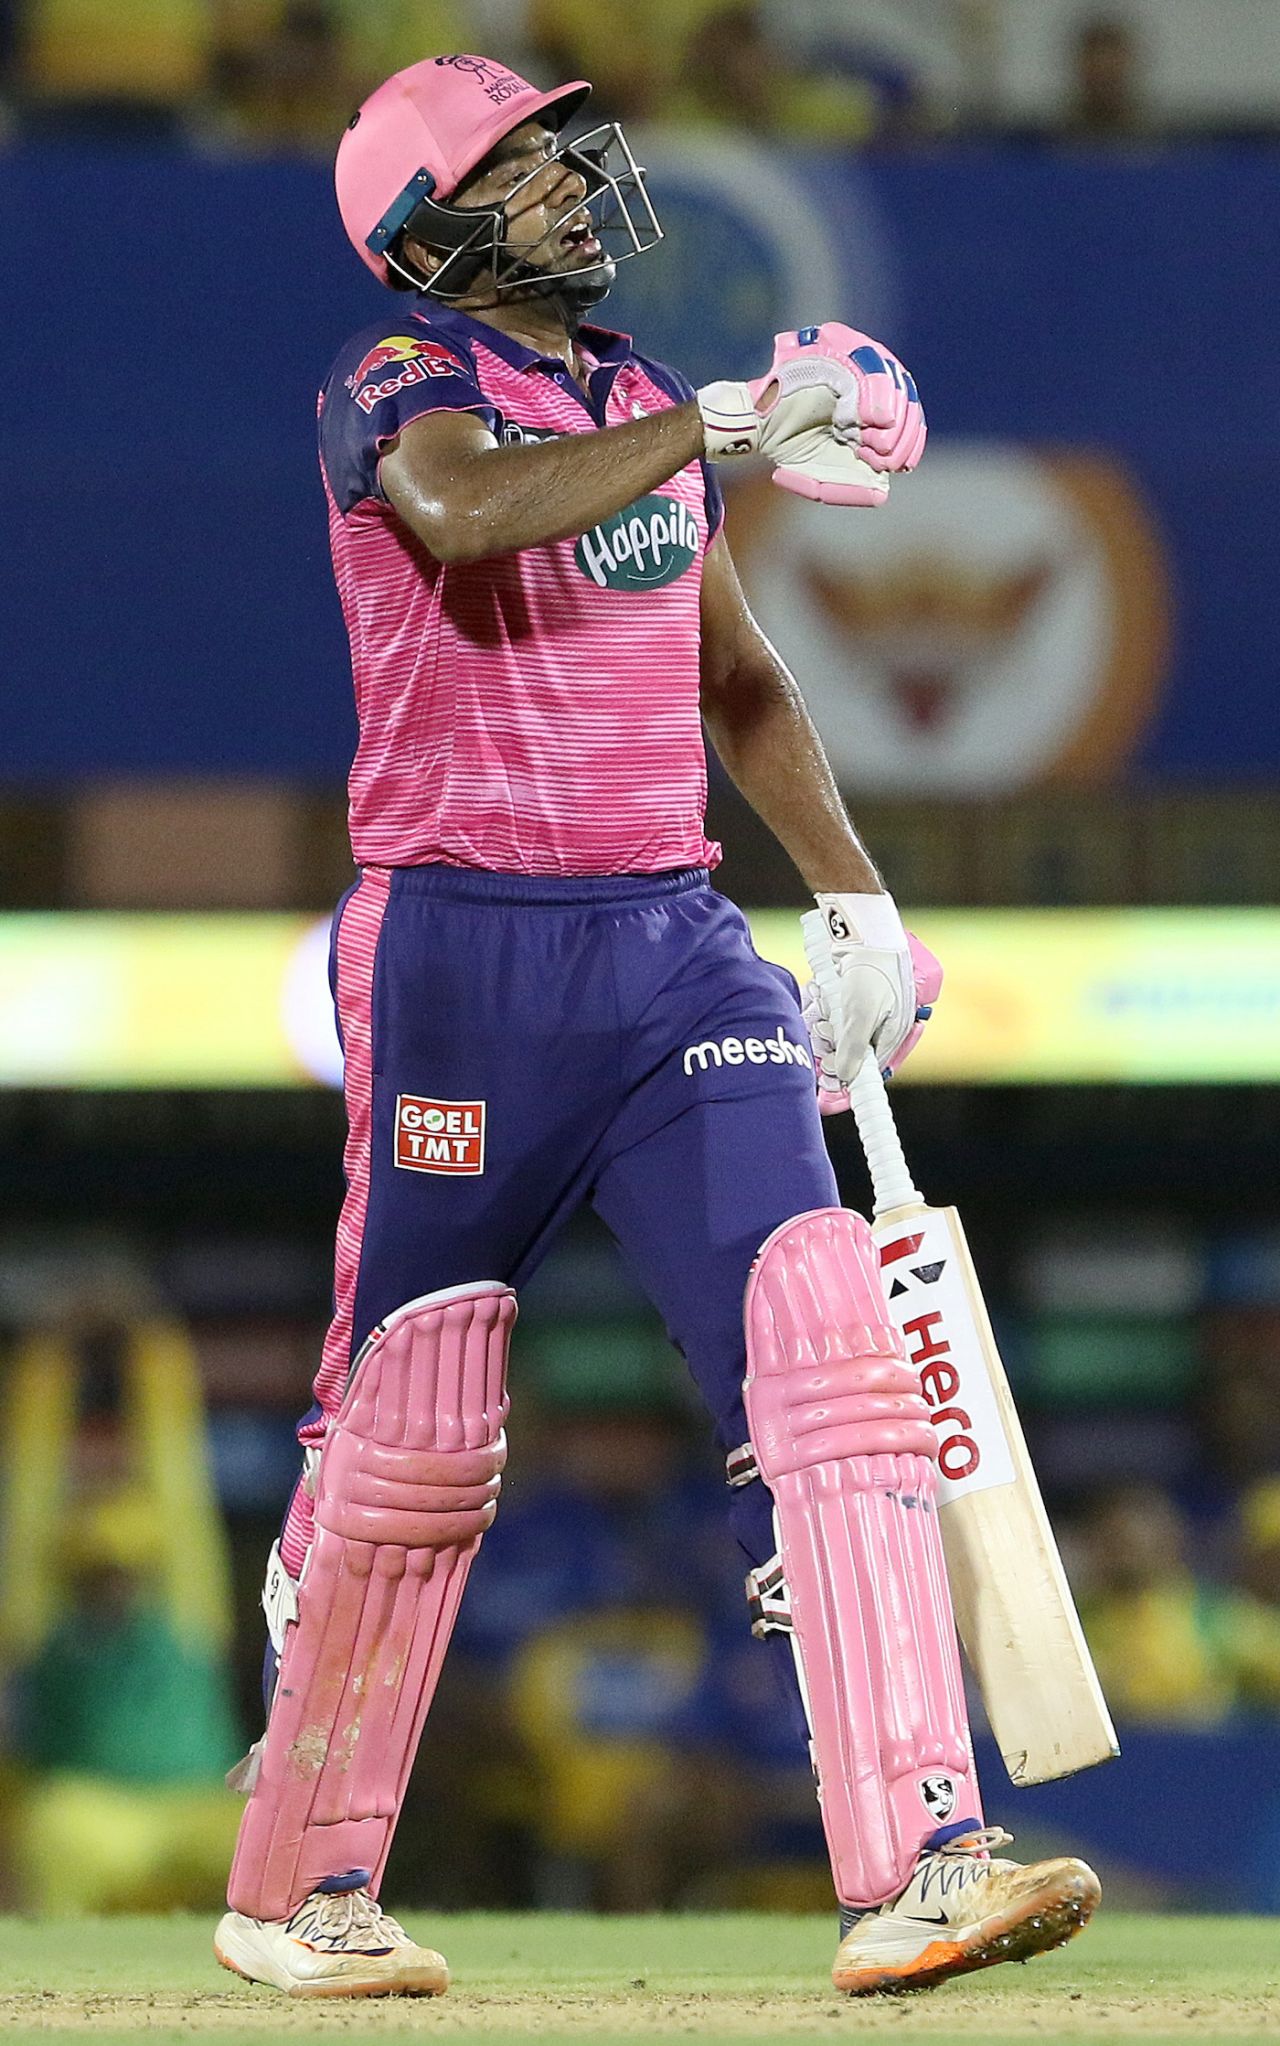 Celebrate with a chest thump - R Ashwin sealed the deal for Royals, this time with the bat, Chennai Super Kings vs Rajasthan Royals, IPL 2022, Brabourne Stadium, Mumbai, May 20, 2022